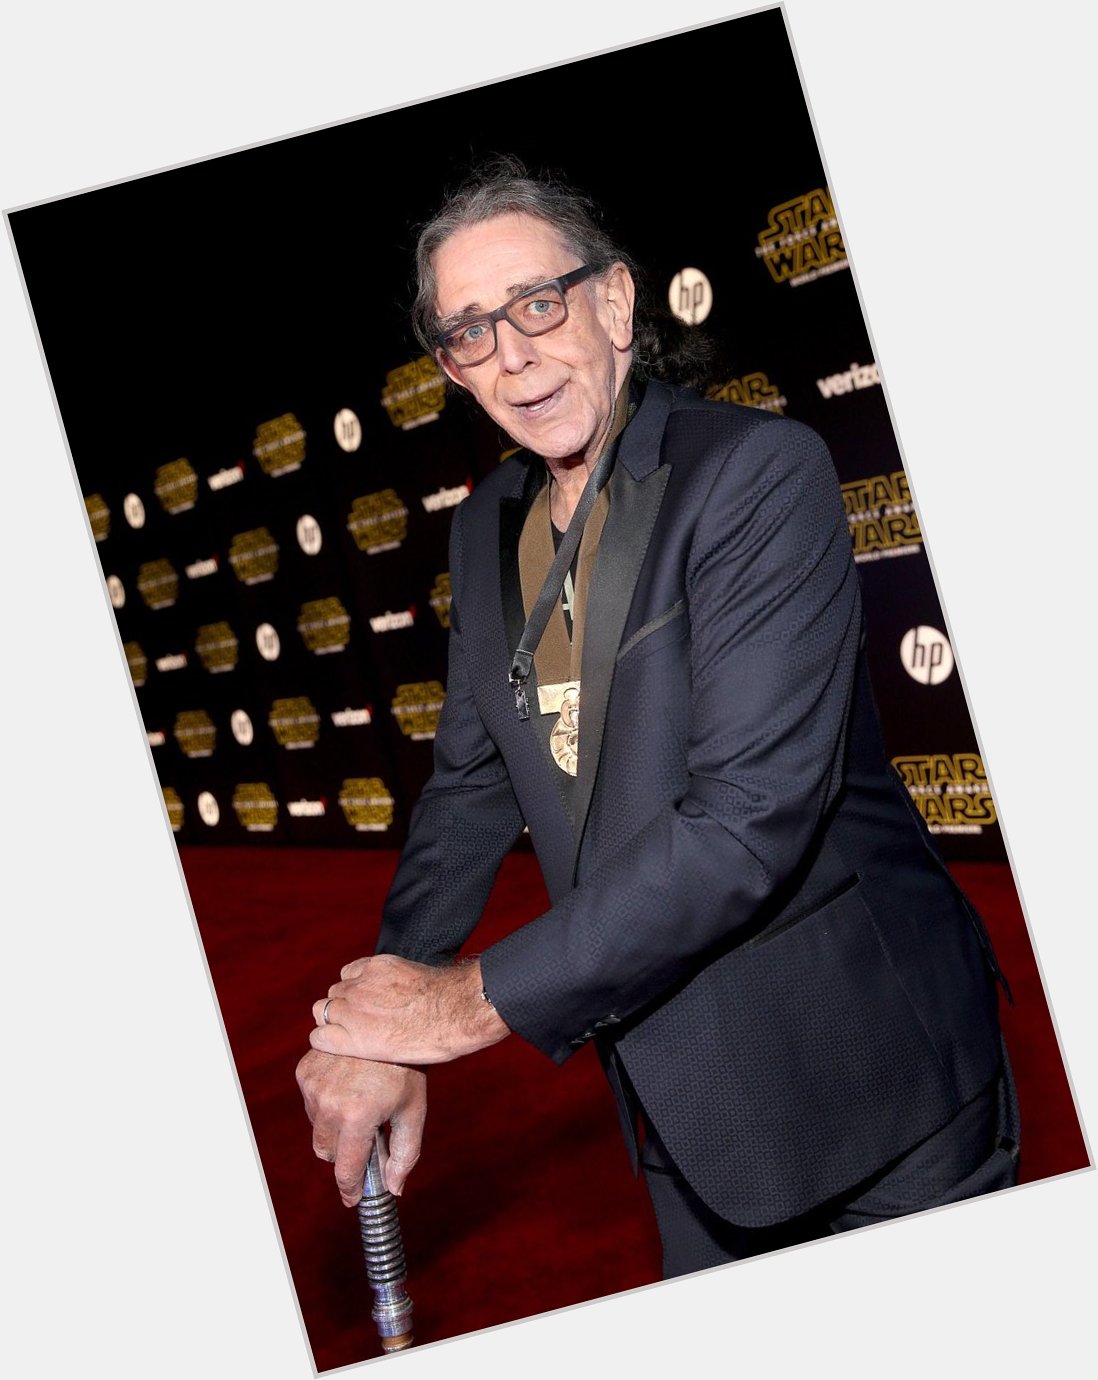  Happy birthday to Peter Mayhew, our favorite Wookiee this side of the galaxy, 